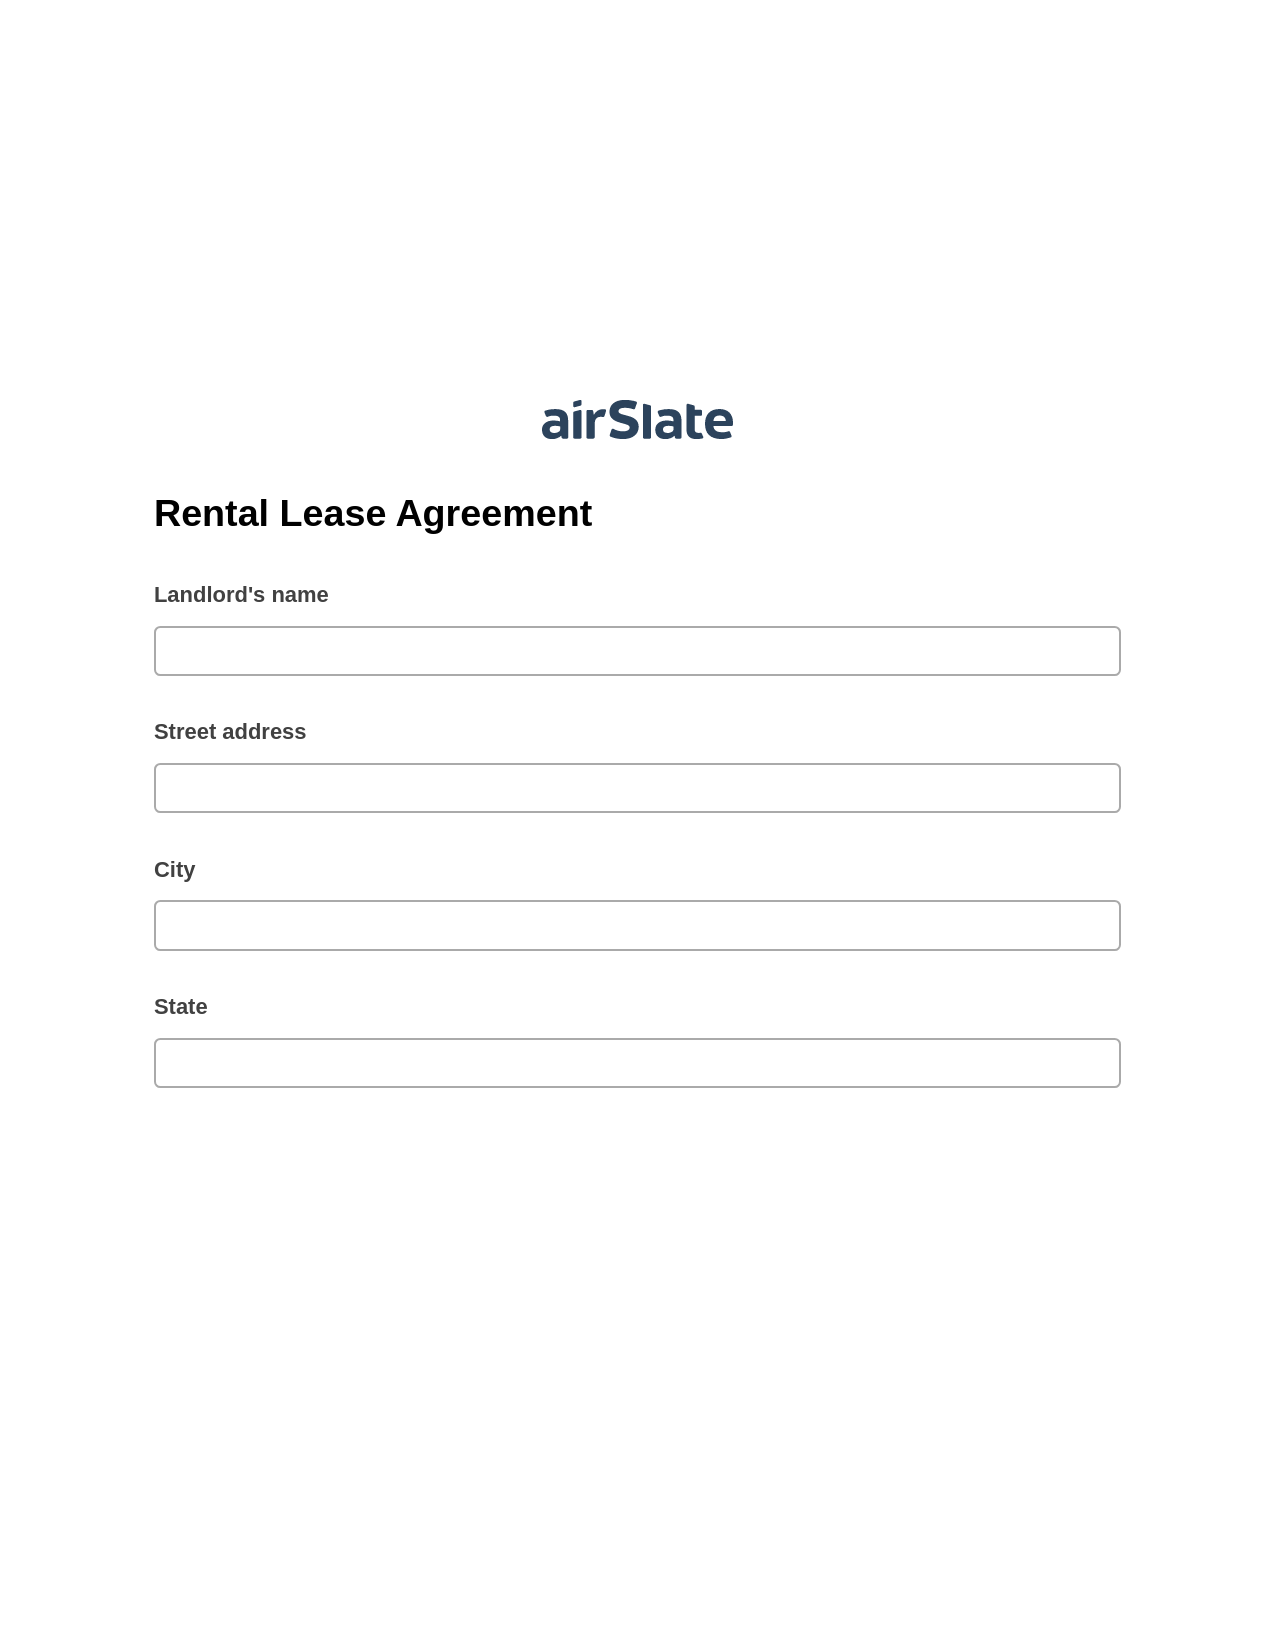 Rental Lease Agreement Pre-fill Slate from MS Dynamics 365 Records Bot, In-person Signing Bot, Box Bot